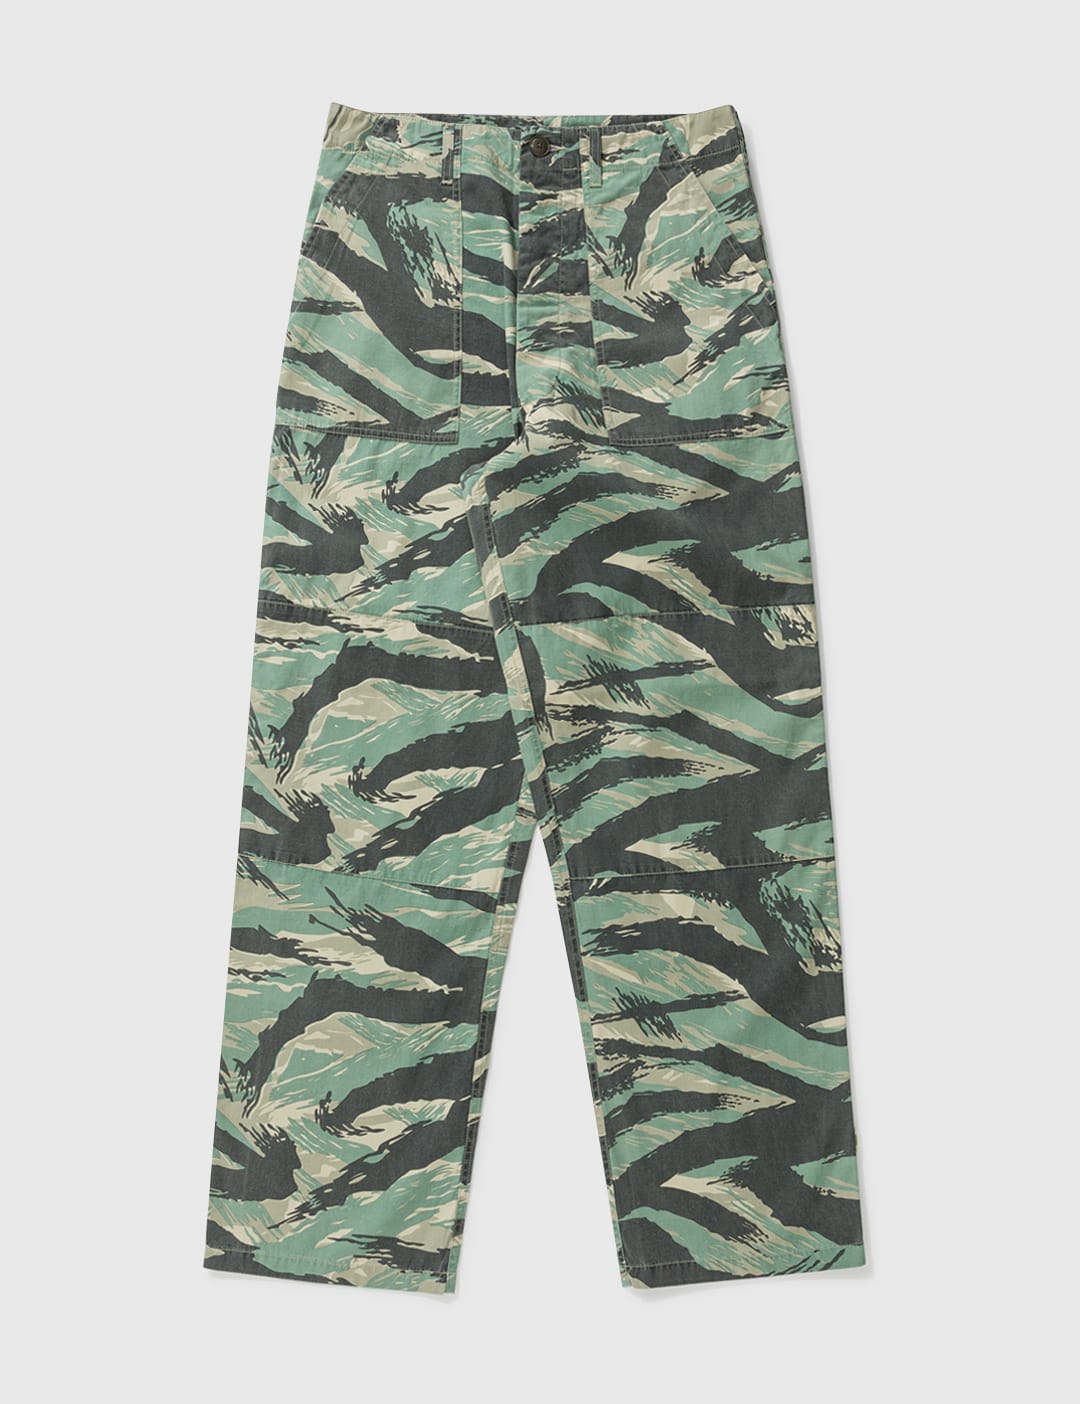 White Mountaineering - Stretched Double Pockets Tapered Pants 